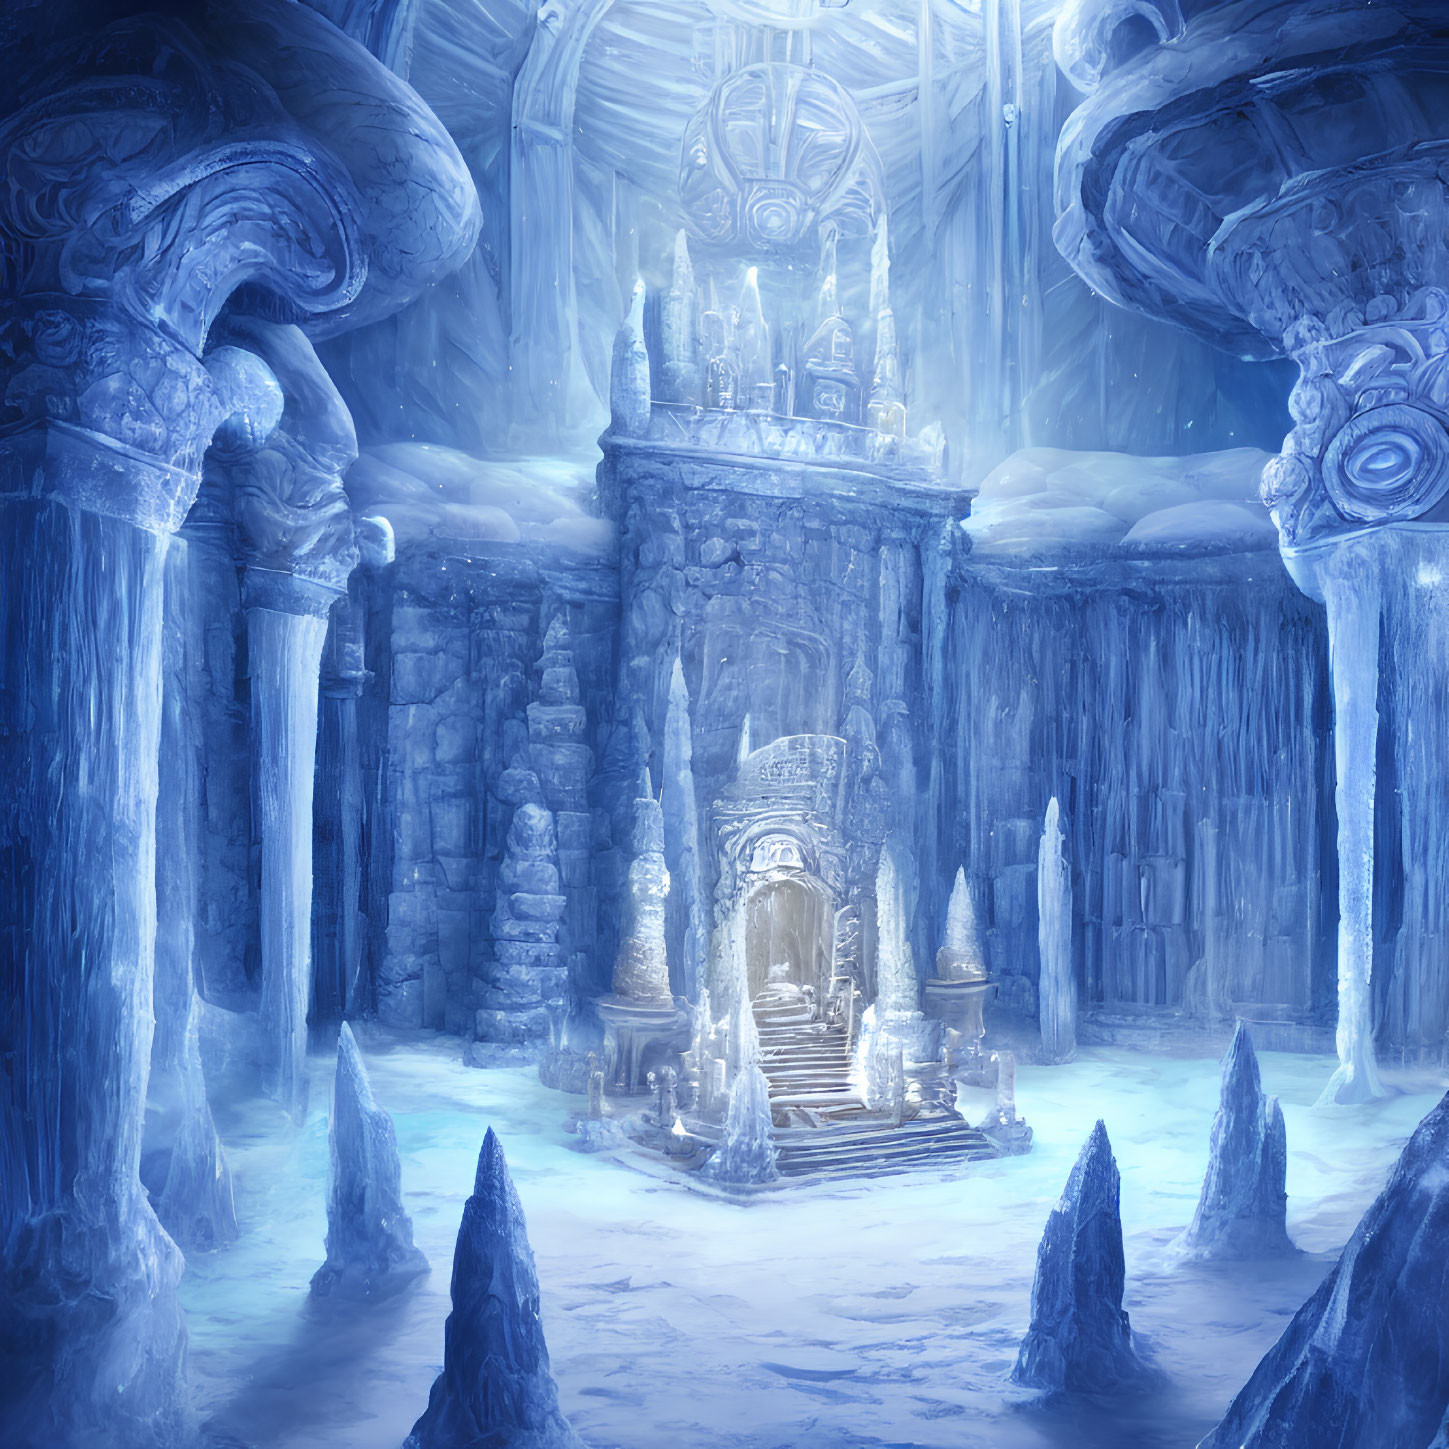 Fantasy palace with frozen pillars, throne, candles in blue hue